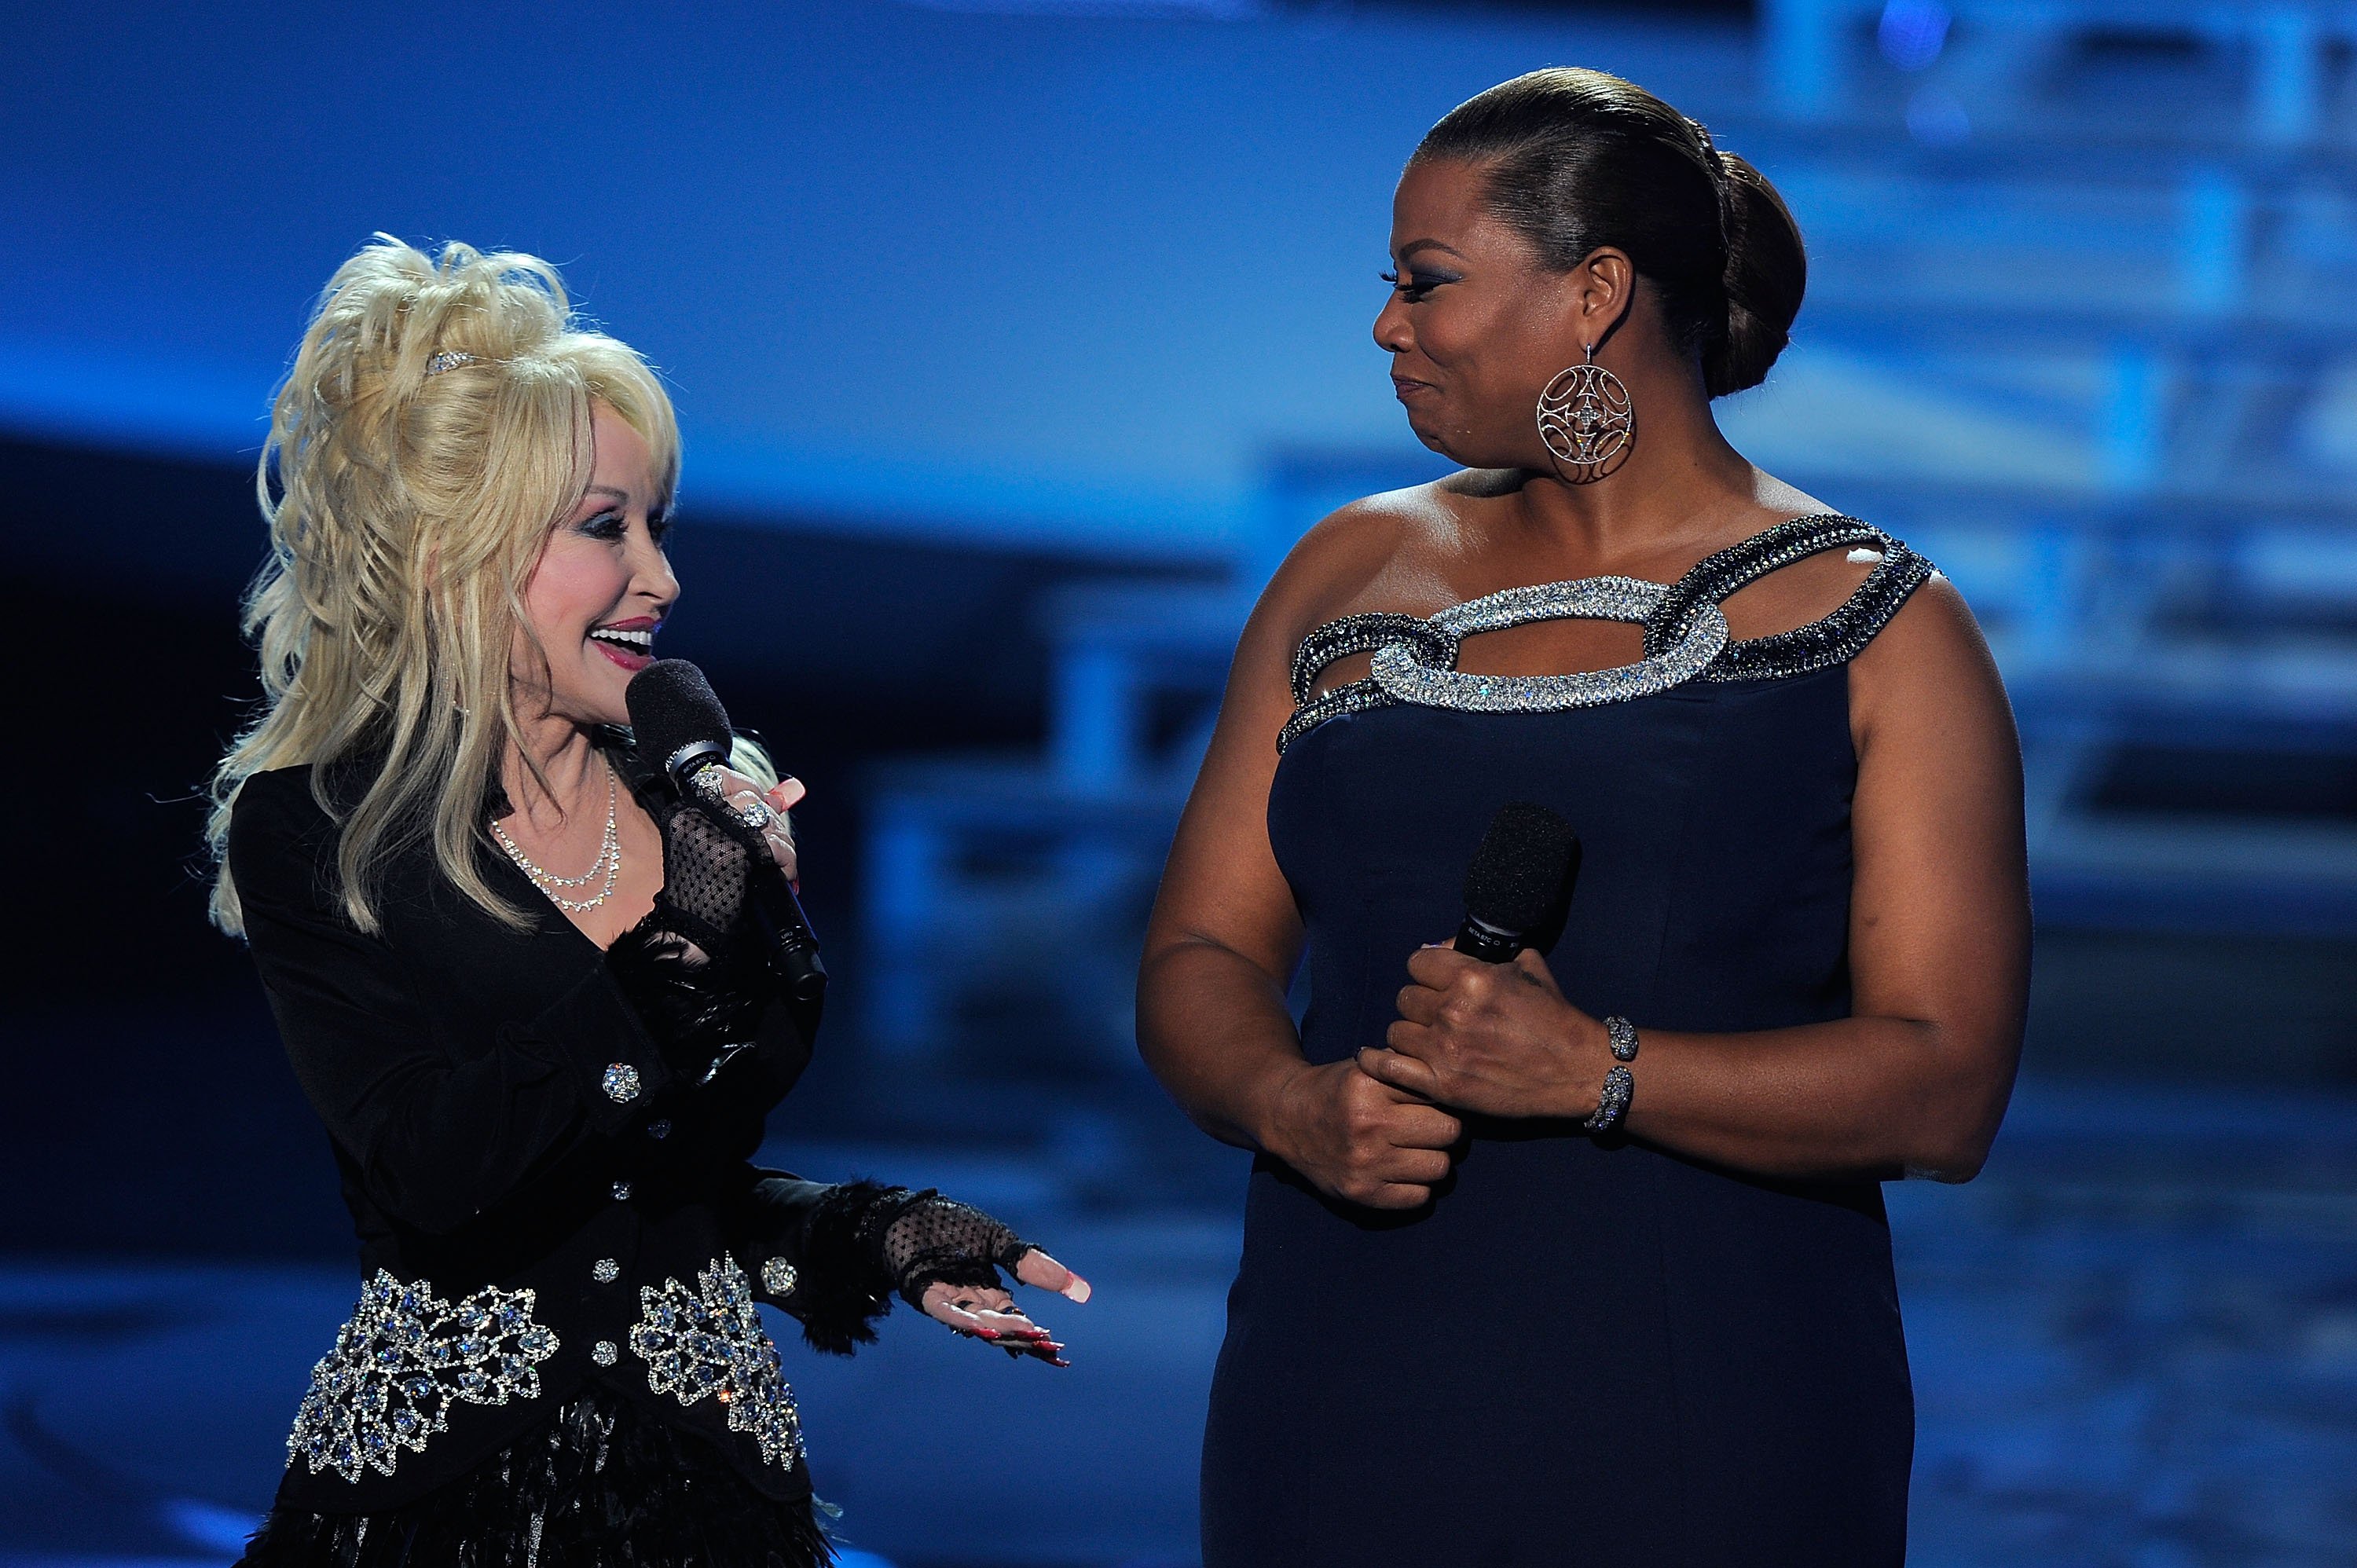 Dolly Parton holds a microphone and smiles while looking at Queen Latifah.